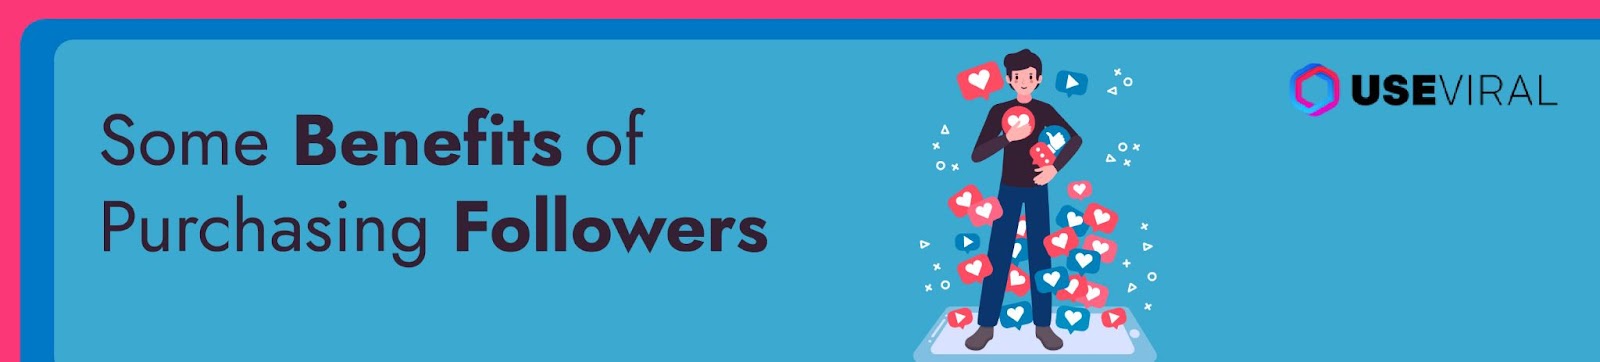 Some Benefits of Purchasing Followers